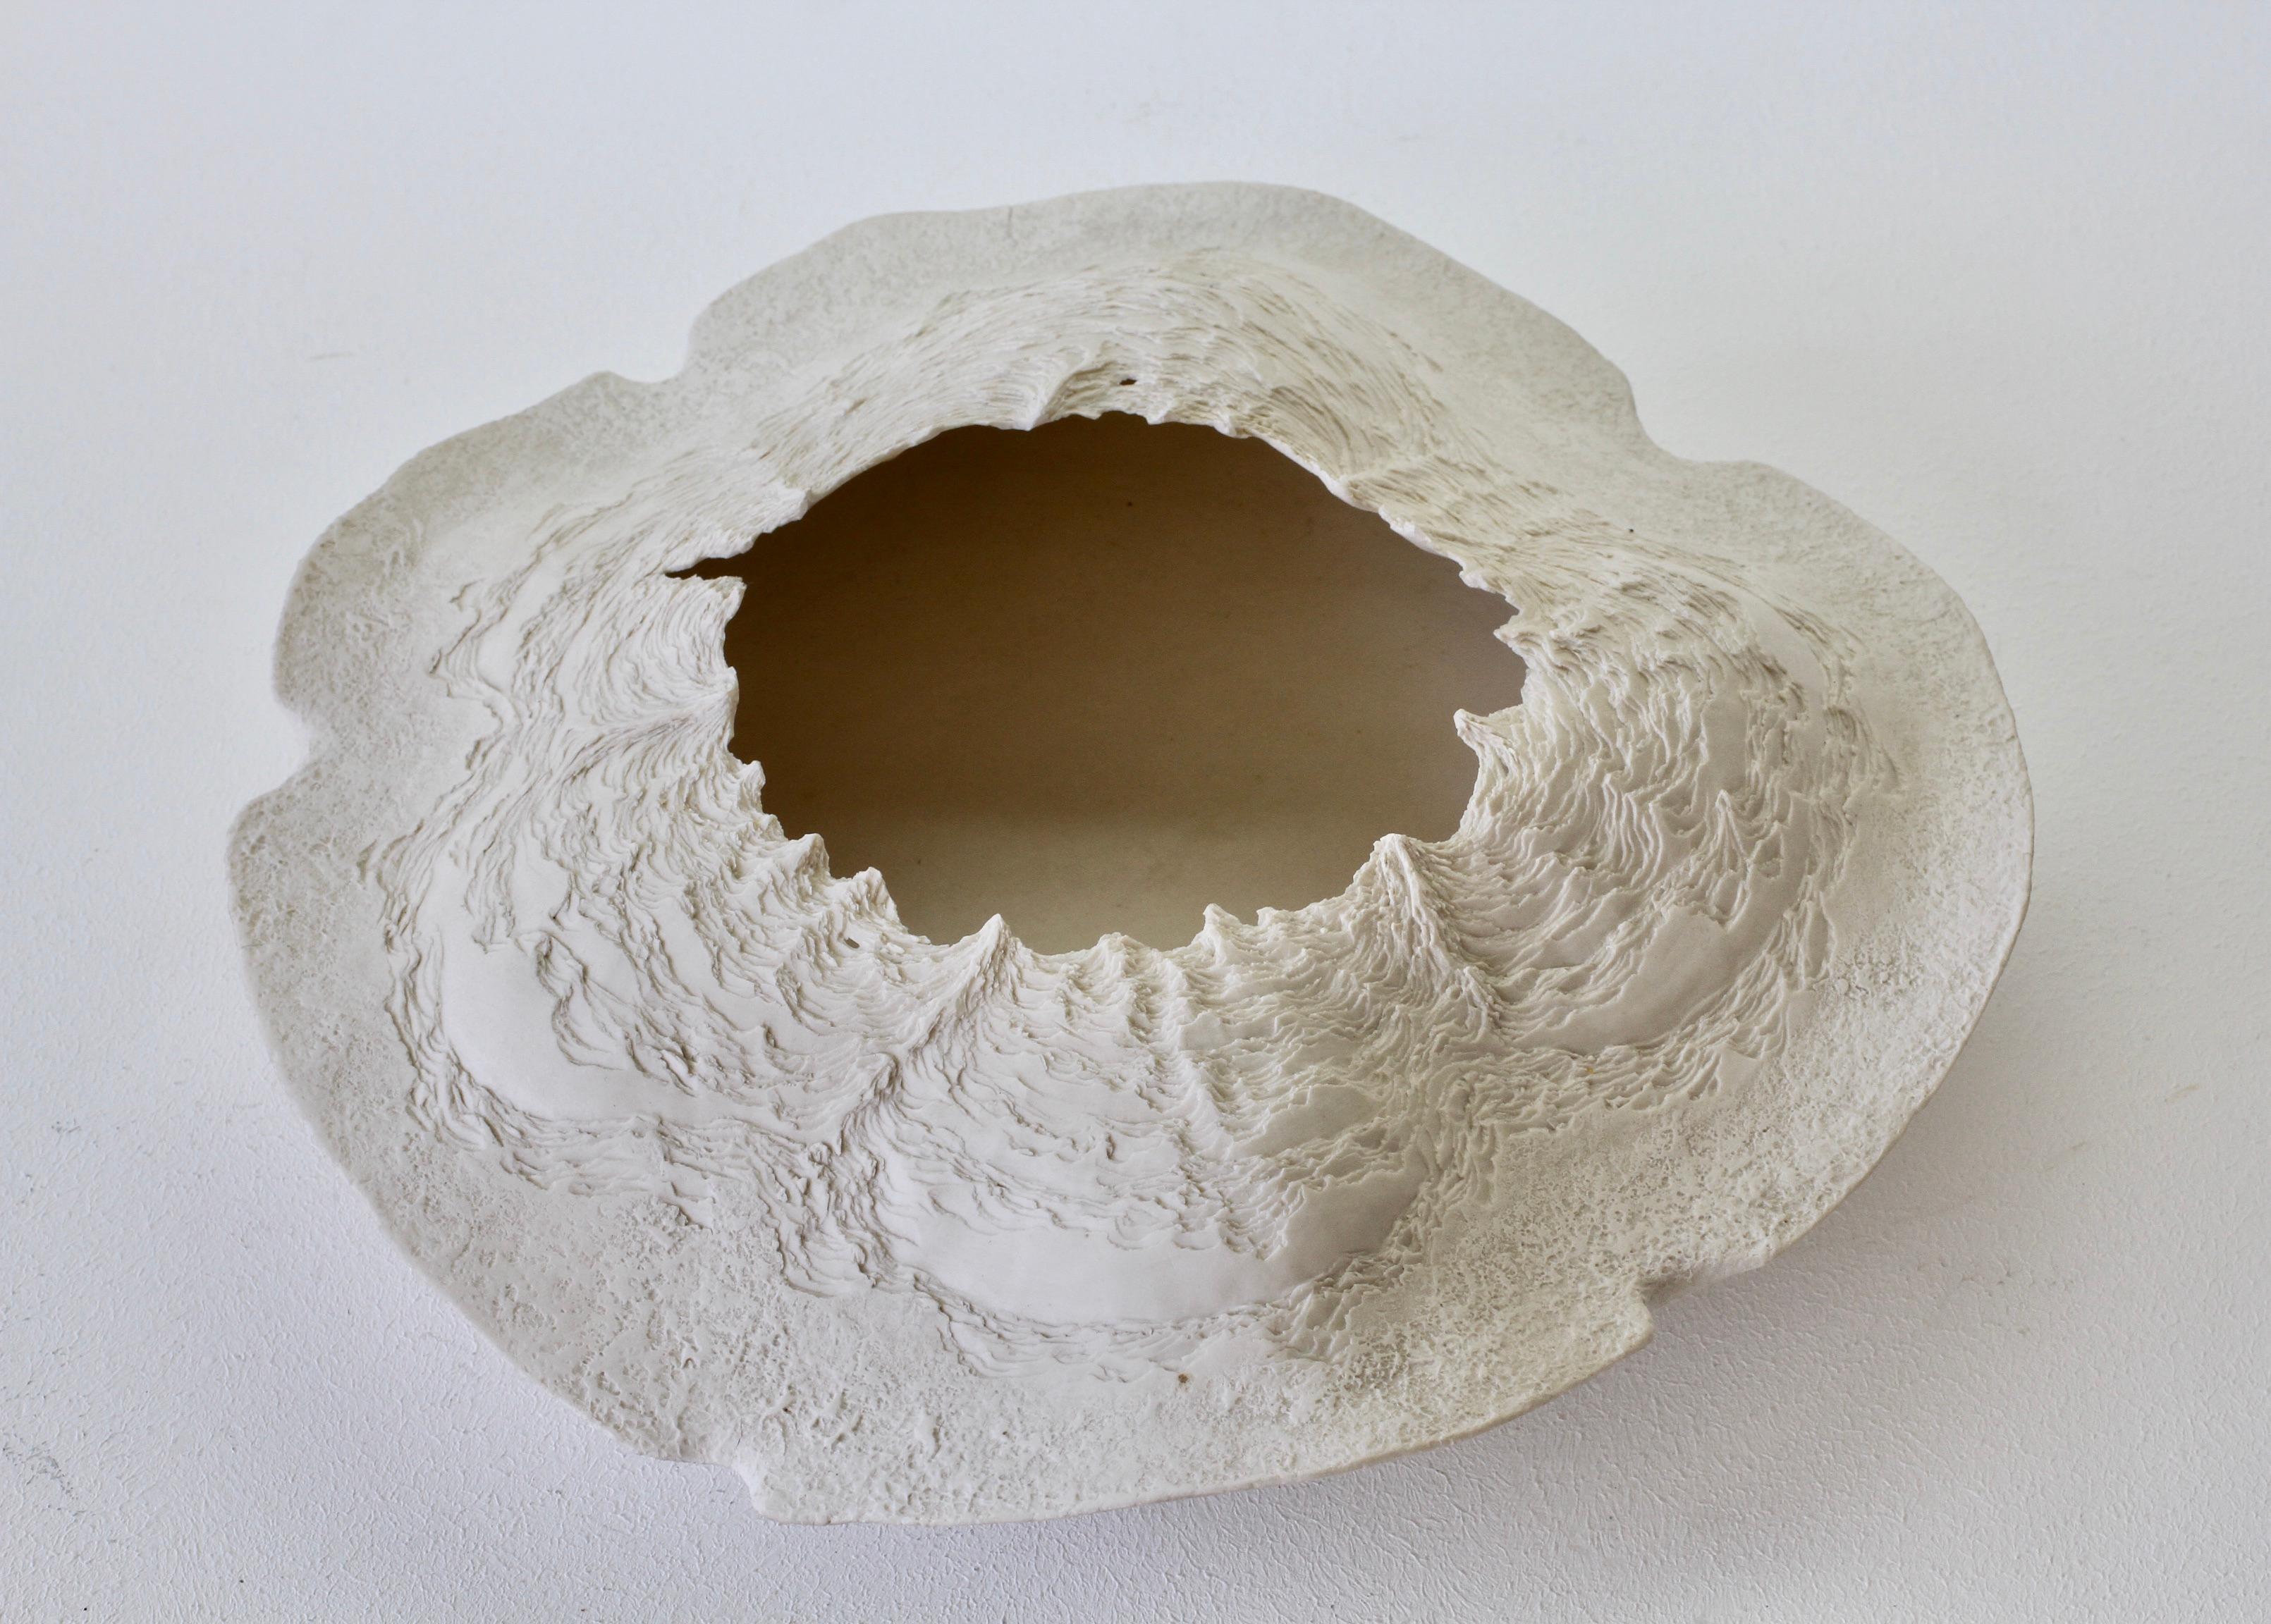 Ceramic Maggie Barnes Carved White Organic Art Pottery Sculpture Bowl or Dish circa 1987 For Sale